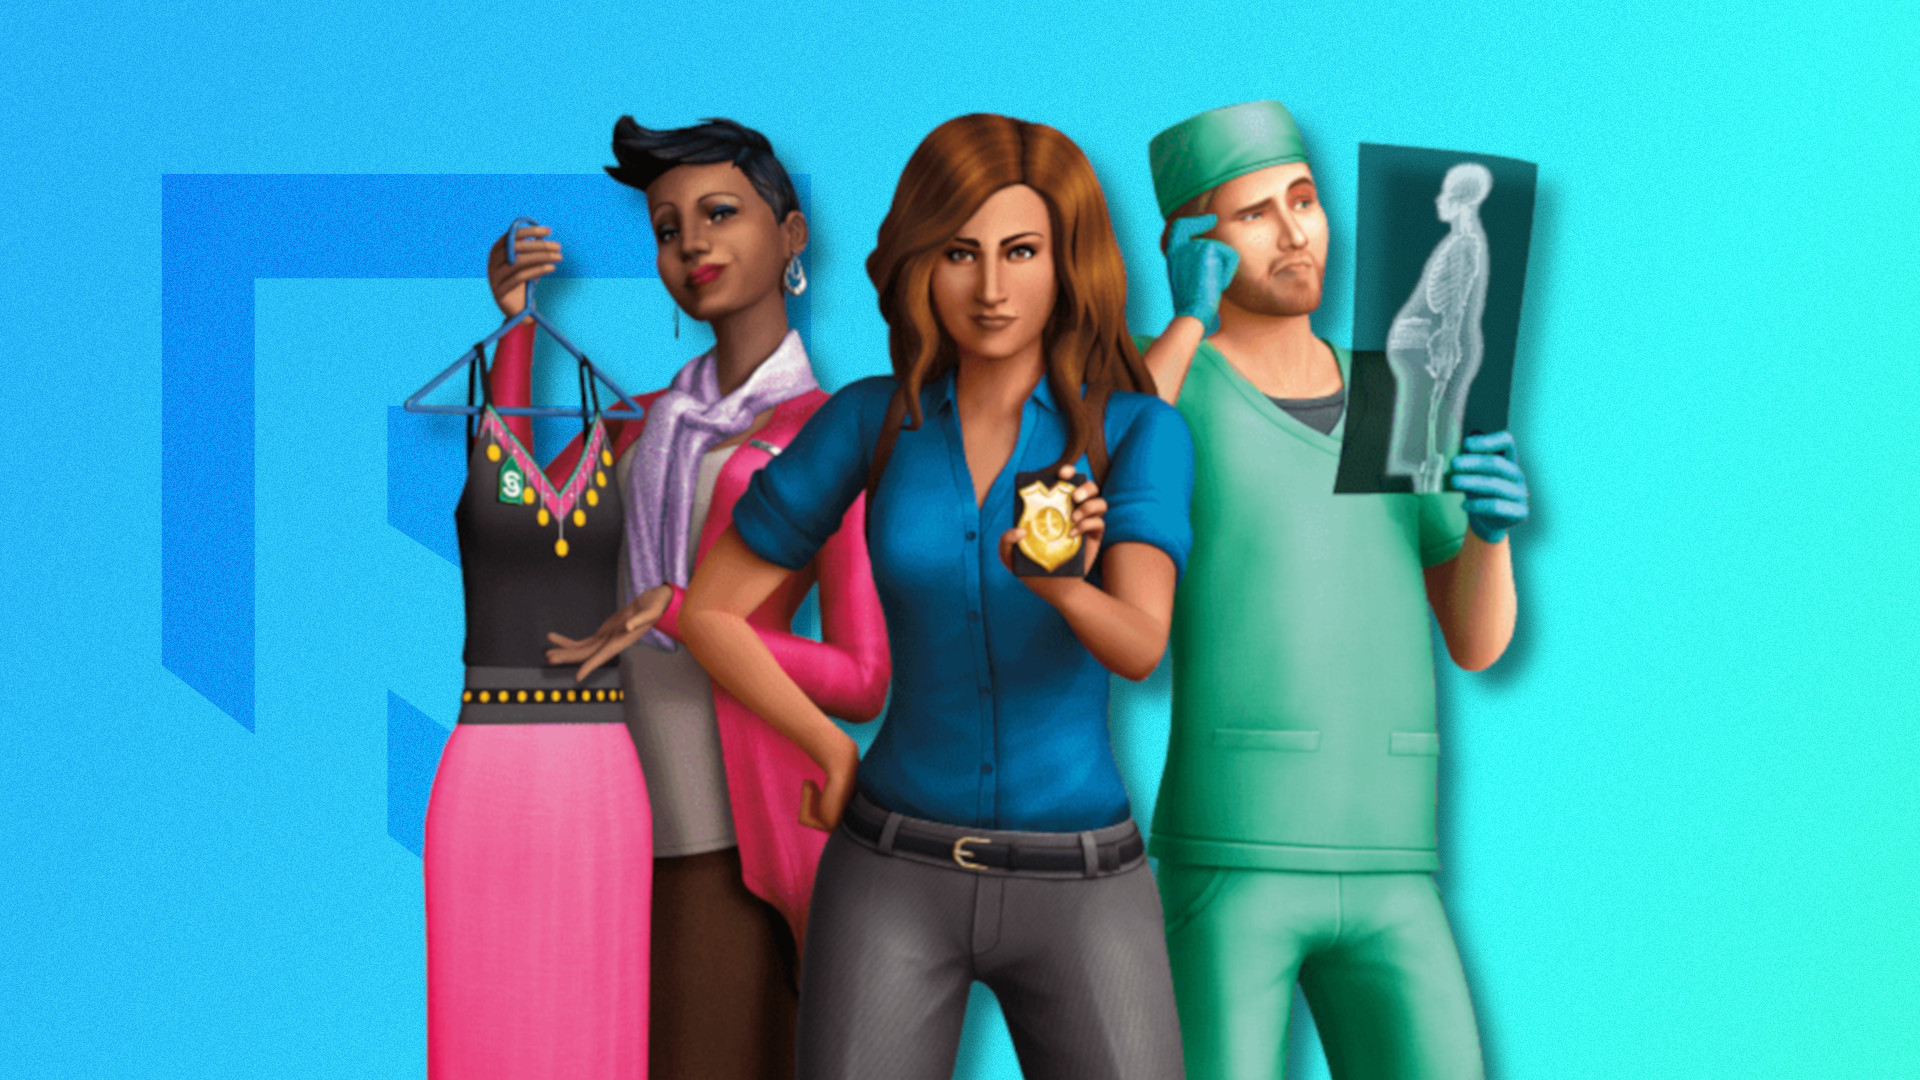 Can You Play The Sims 4 For Free? Answered